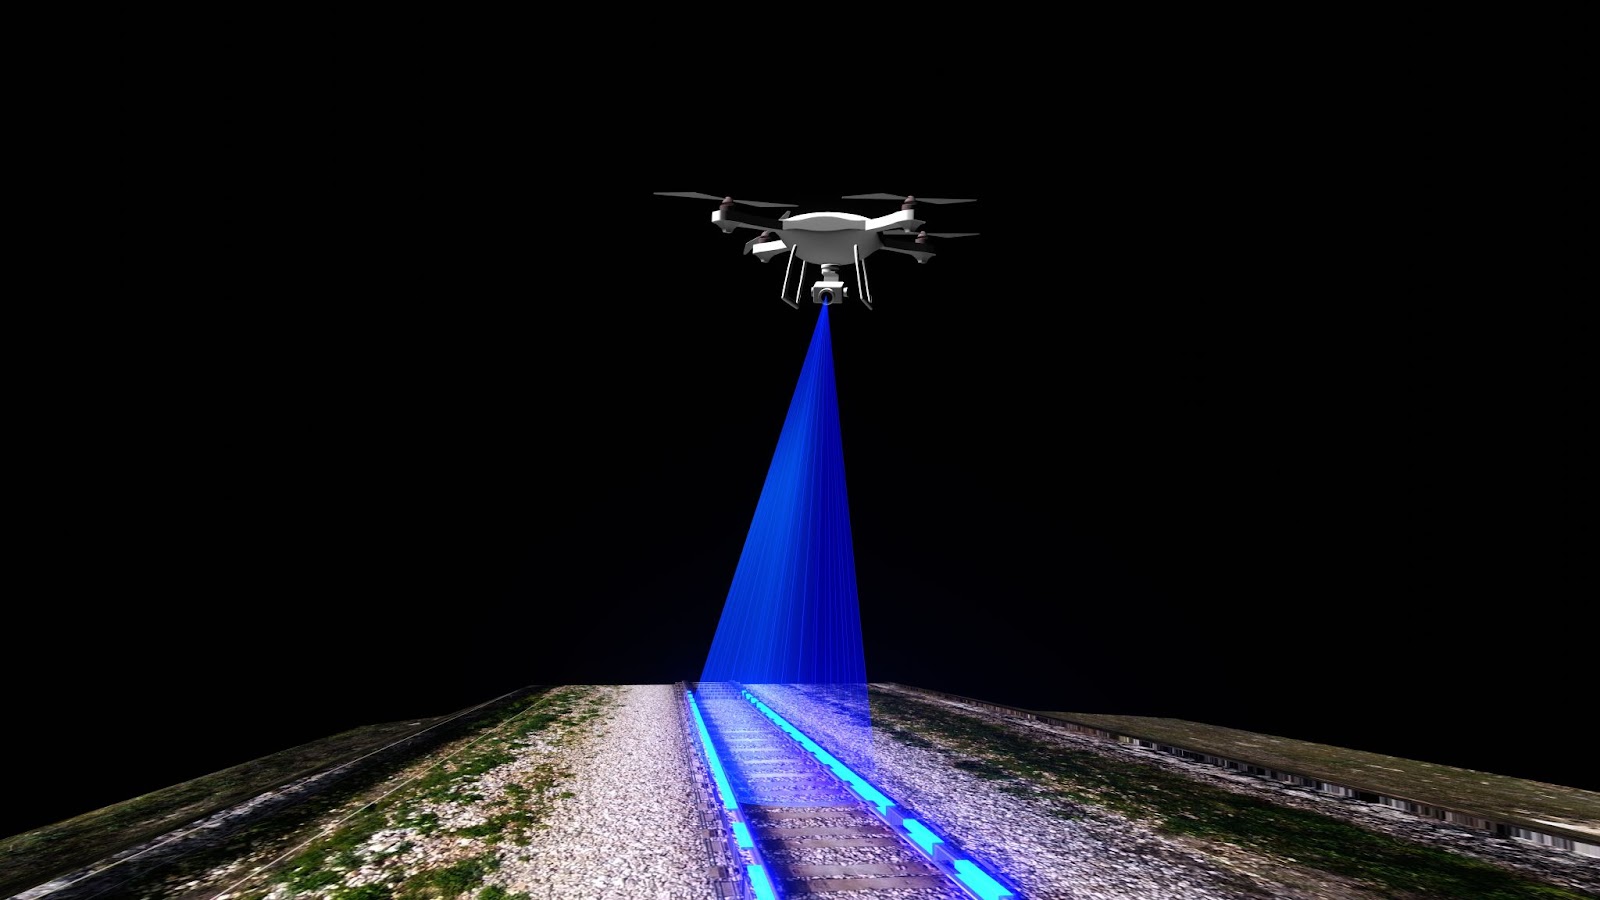 LiDAR drone conductng railway inspection at night time